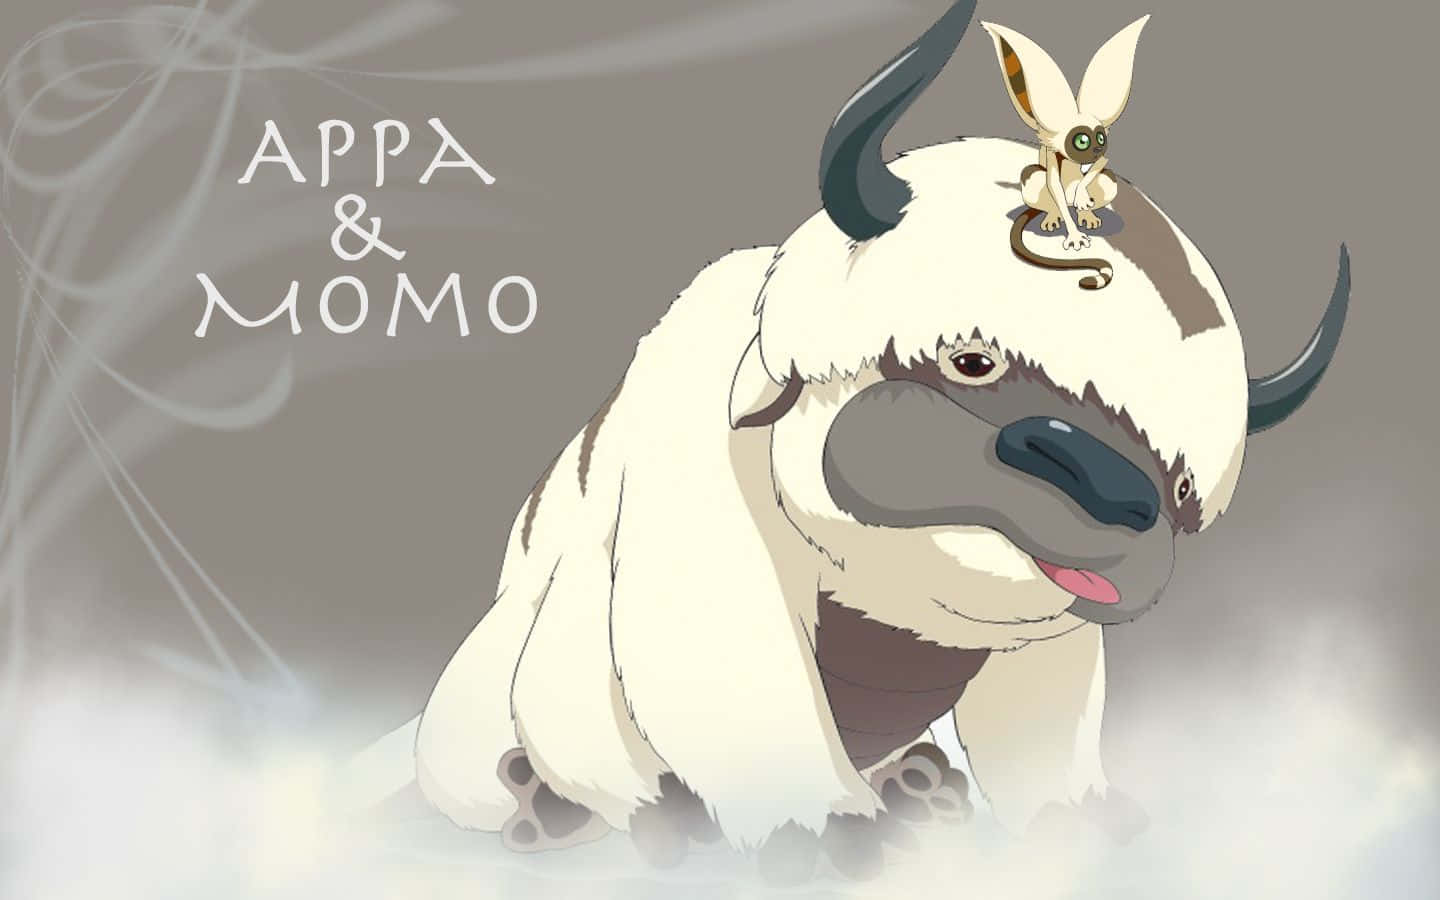 Soaring High In The Sky, Avatar's Appa Is Always Ready For An Adventure. Wallpaper